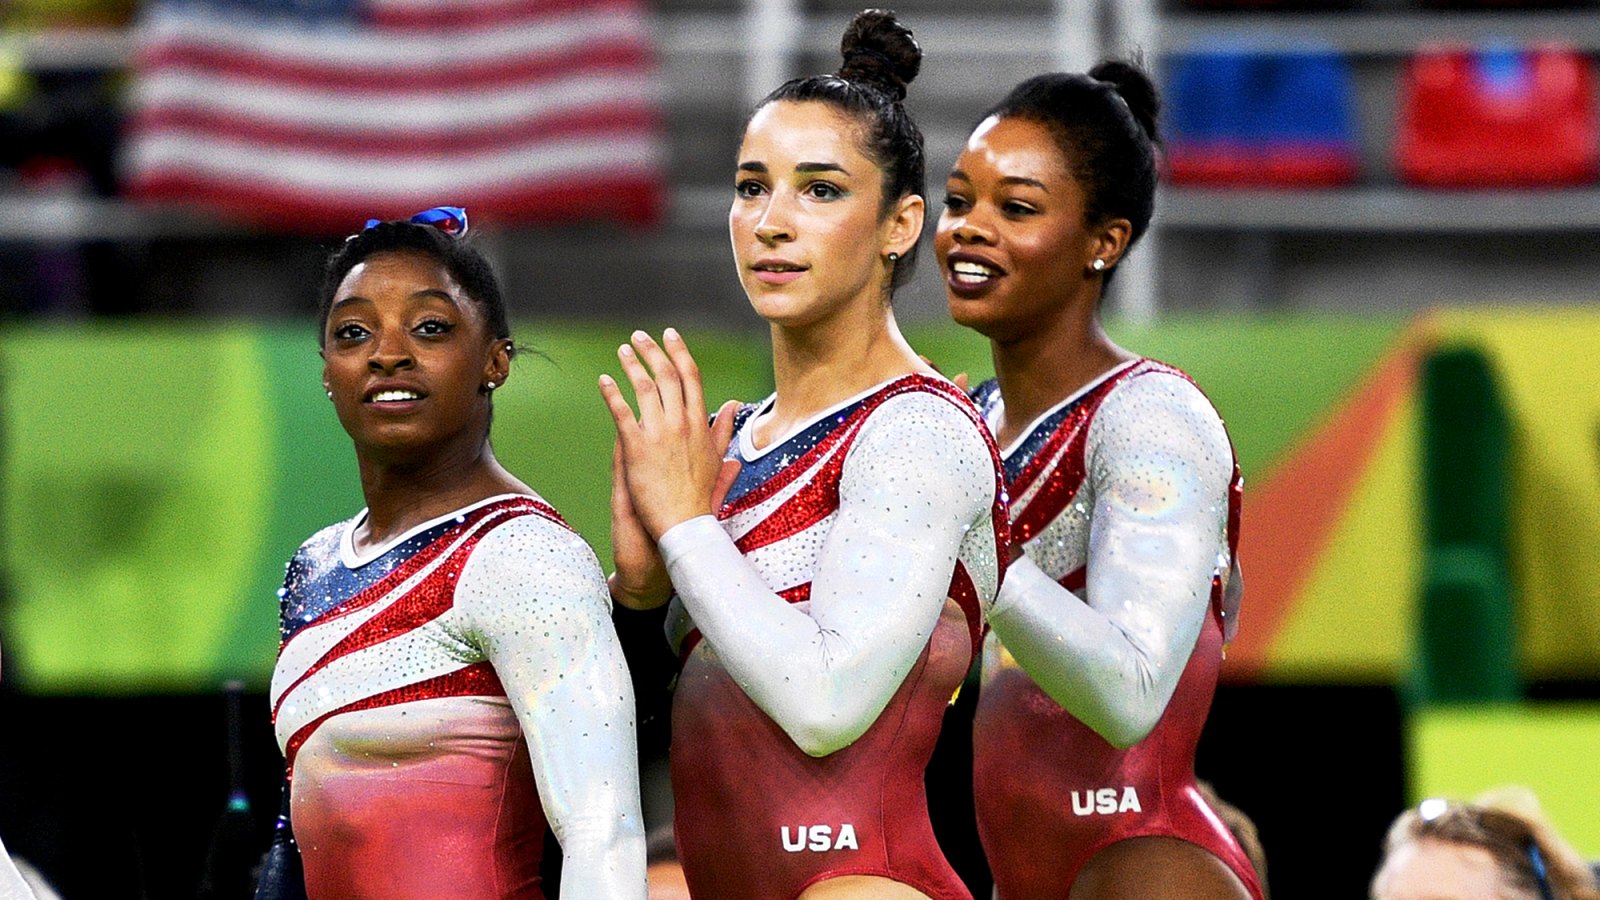 Simone Biles, Aly Raisman and Gabby Douglas of the United States celebrate winning the gold medal during the Artistic Gymnastics Women's Team Final on Day 4 of the Rio 2016 Olympic Games at the Rio Olympic Arena in Rio de Janeiro, Brazil.